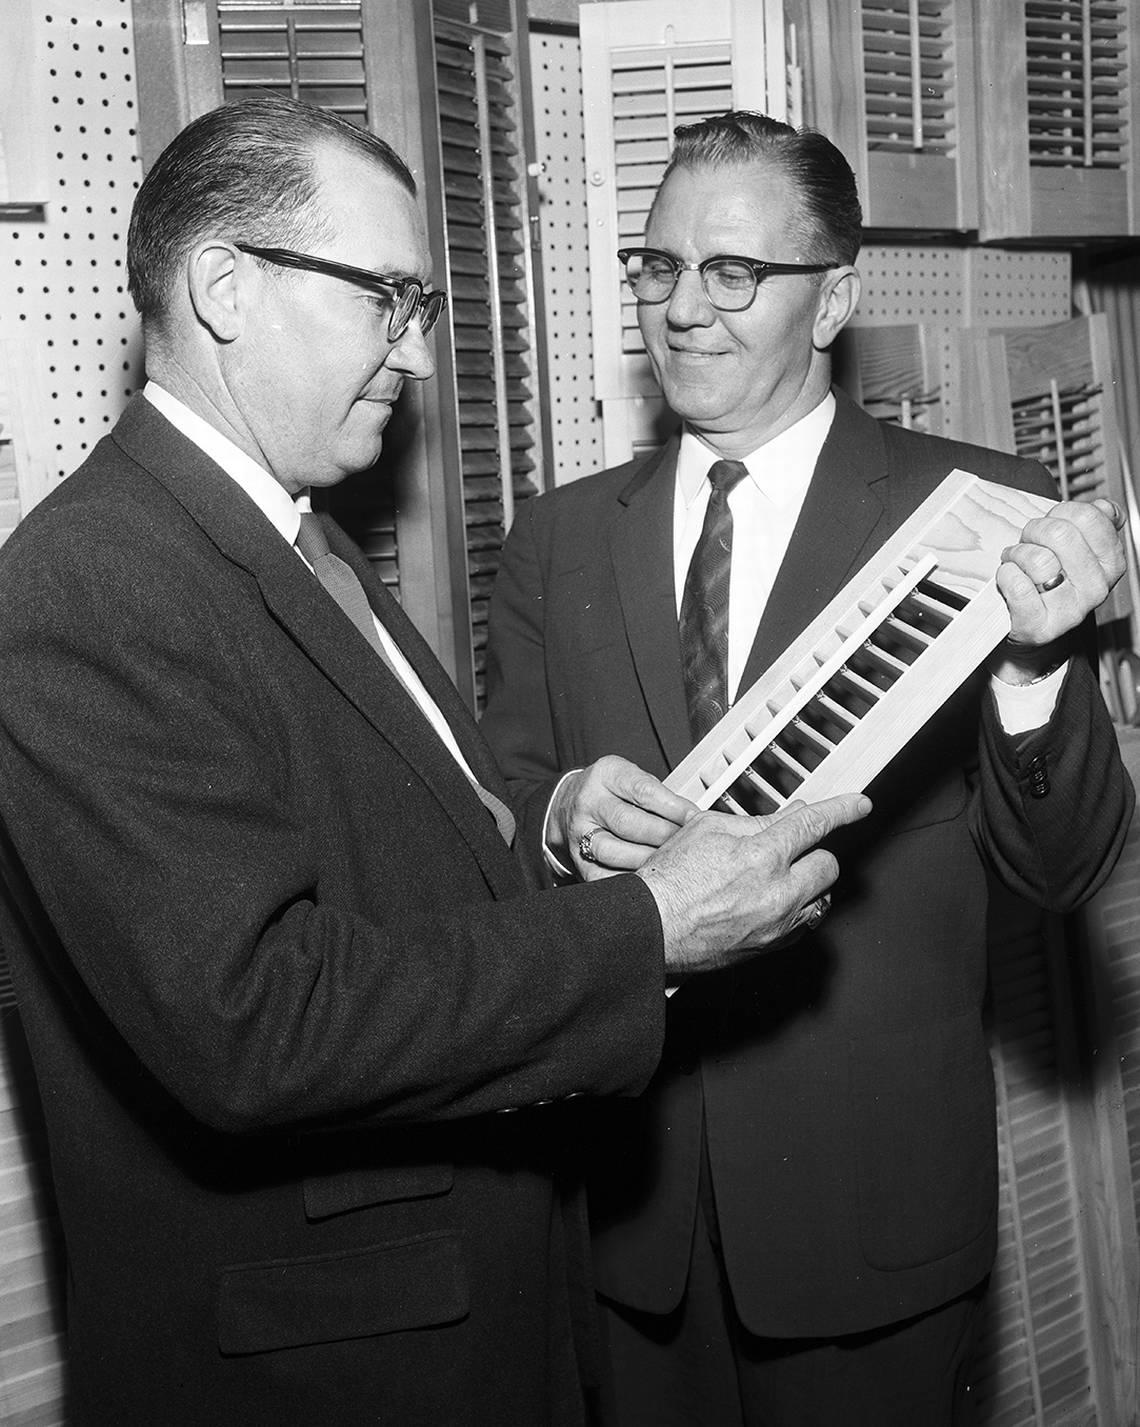 Feb. 18, 1959: Leonard’s Department Store’s Home Improvement Center will conduct an official opening Friday with various prizes to be given. L. G. Lacy, left, is manager of sales and installation. H.E. Willet is manager of sales and merchandising.